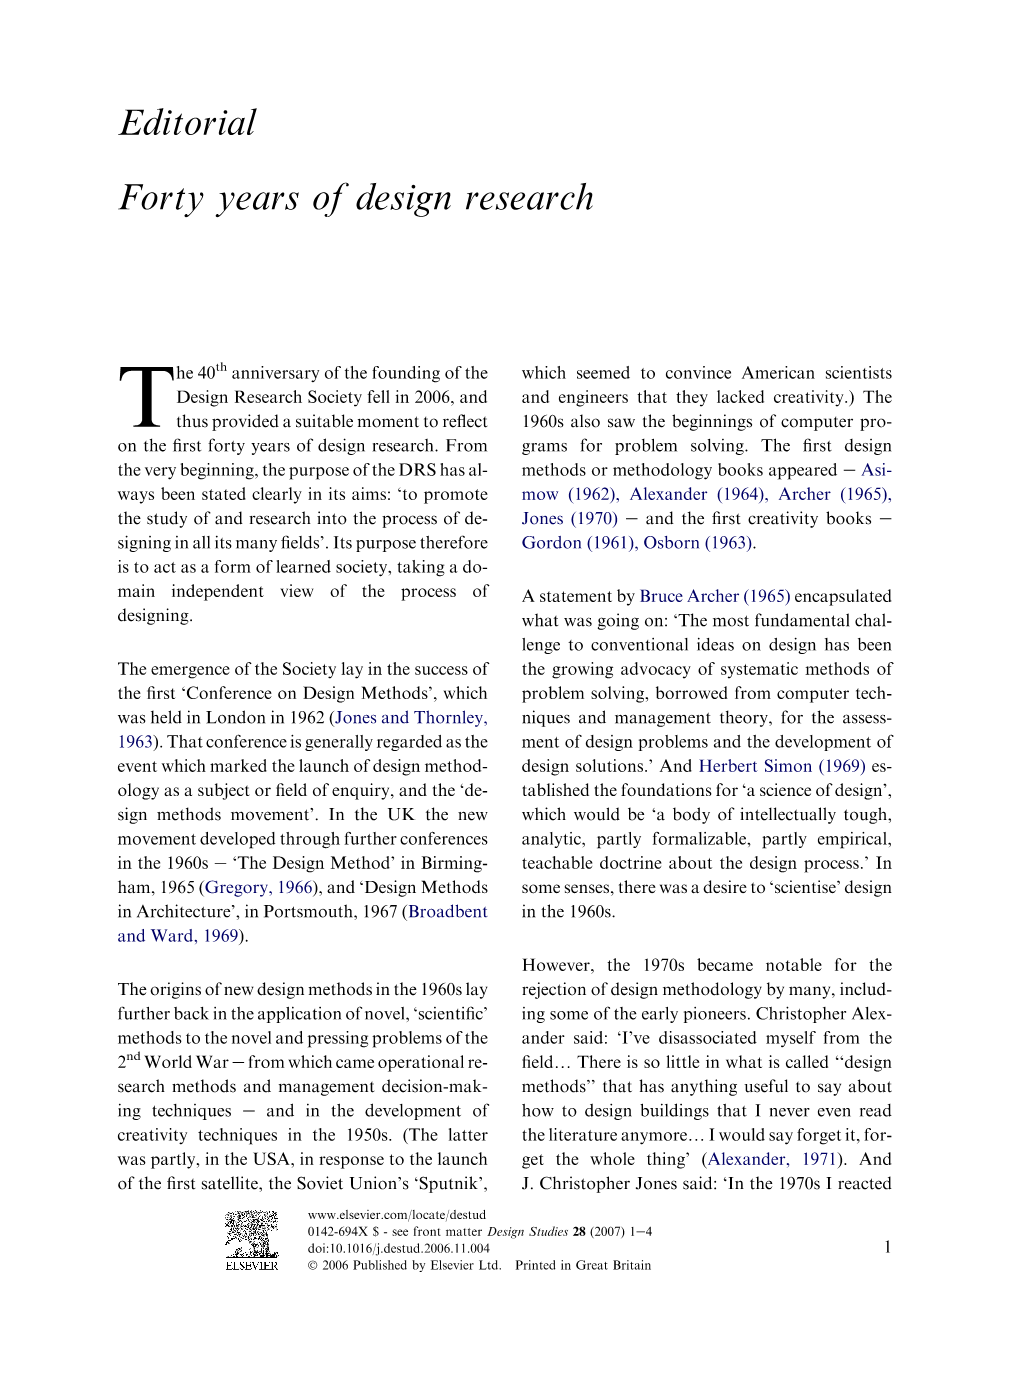 Editorial Forty Years of Design Research